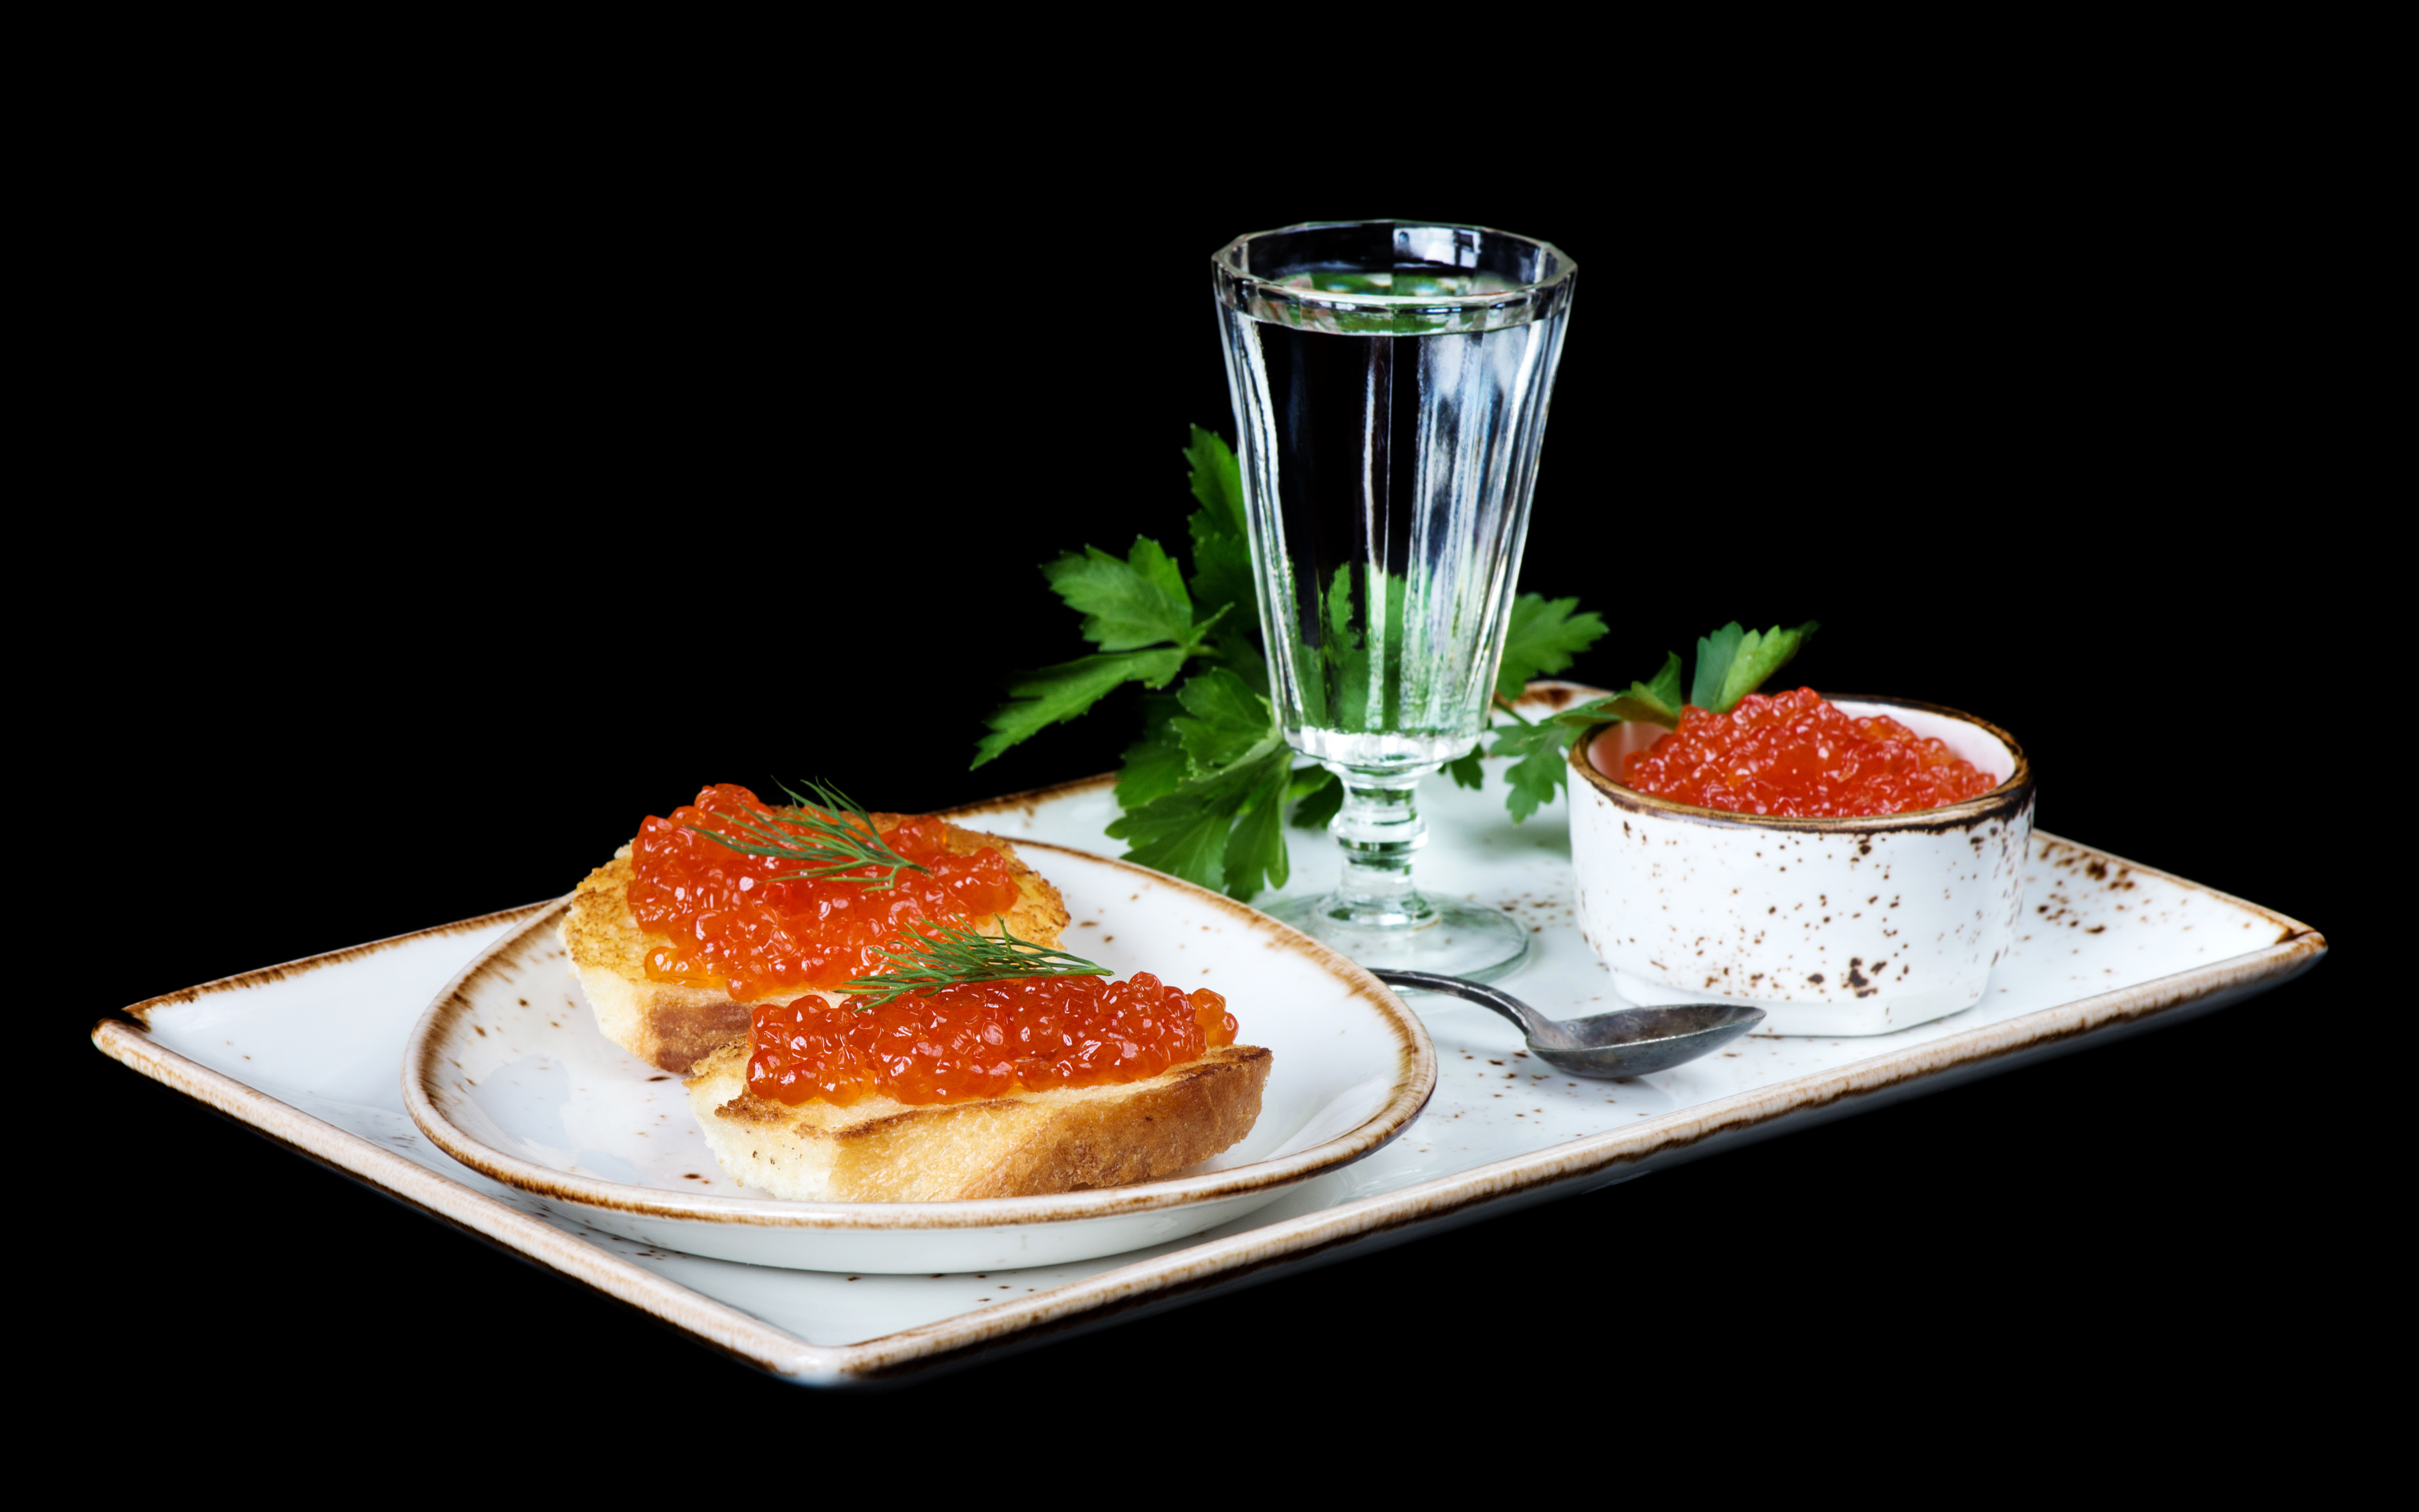 2017Food_A_glass_of_vodka__sandwiches_with_red_caviar_and_parsley_on_the_table_118419_.jpg